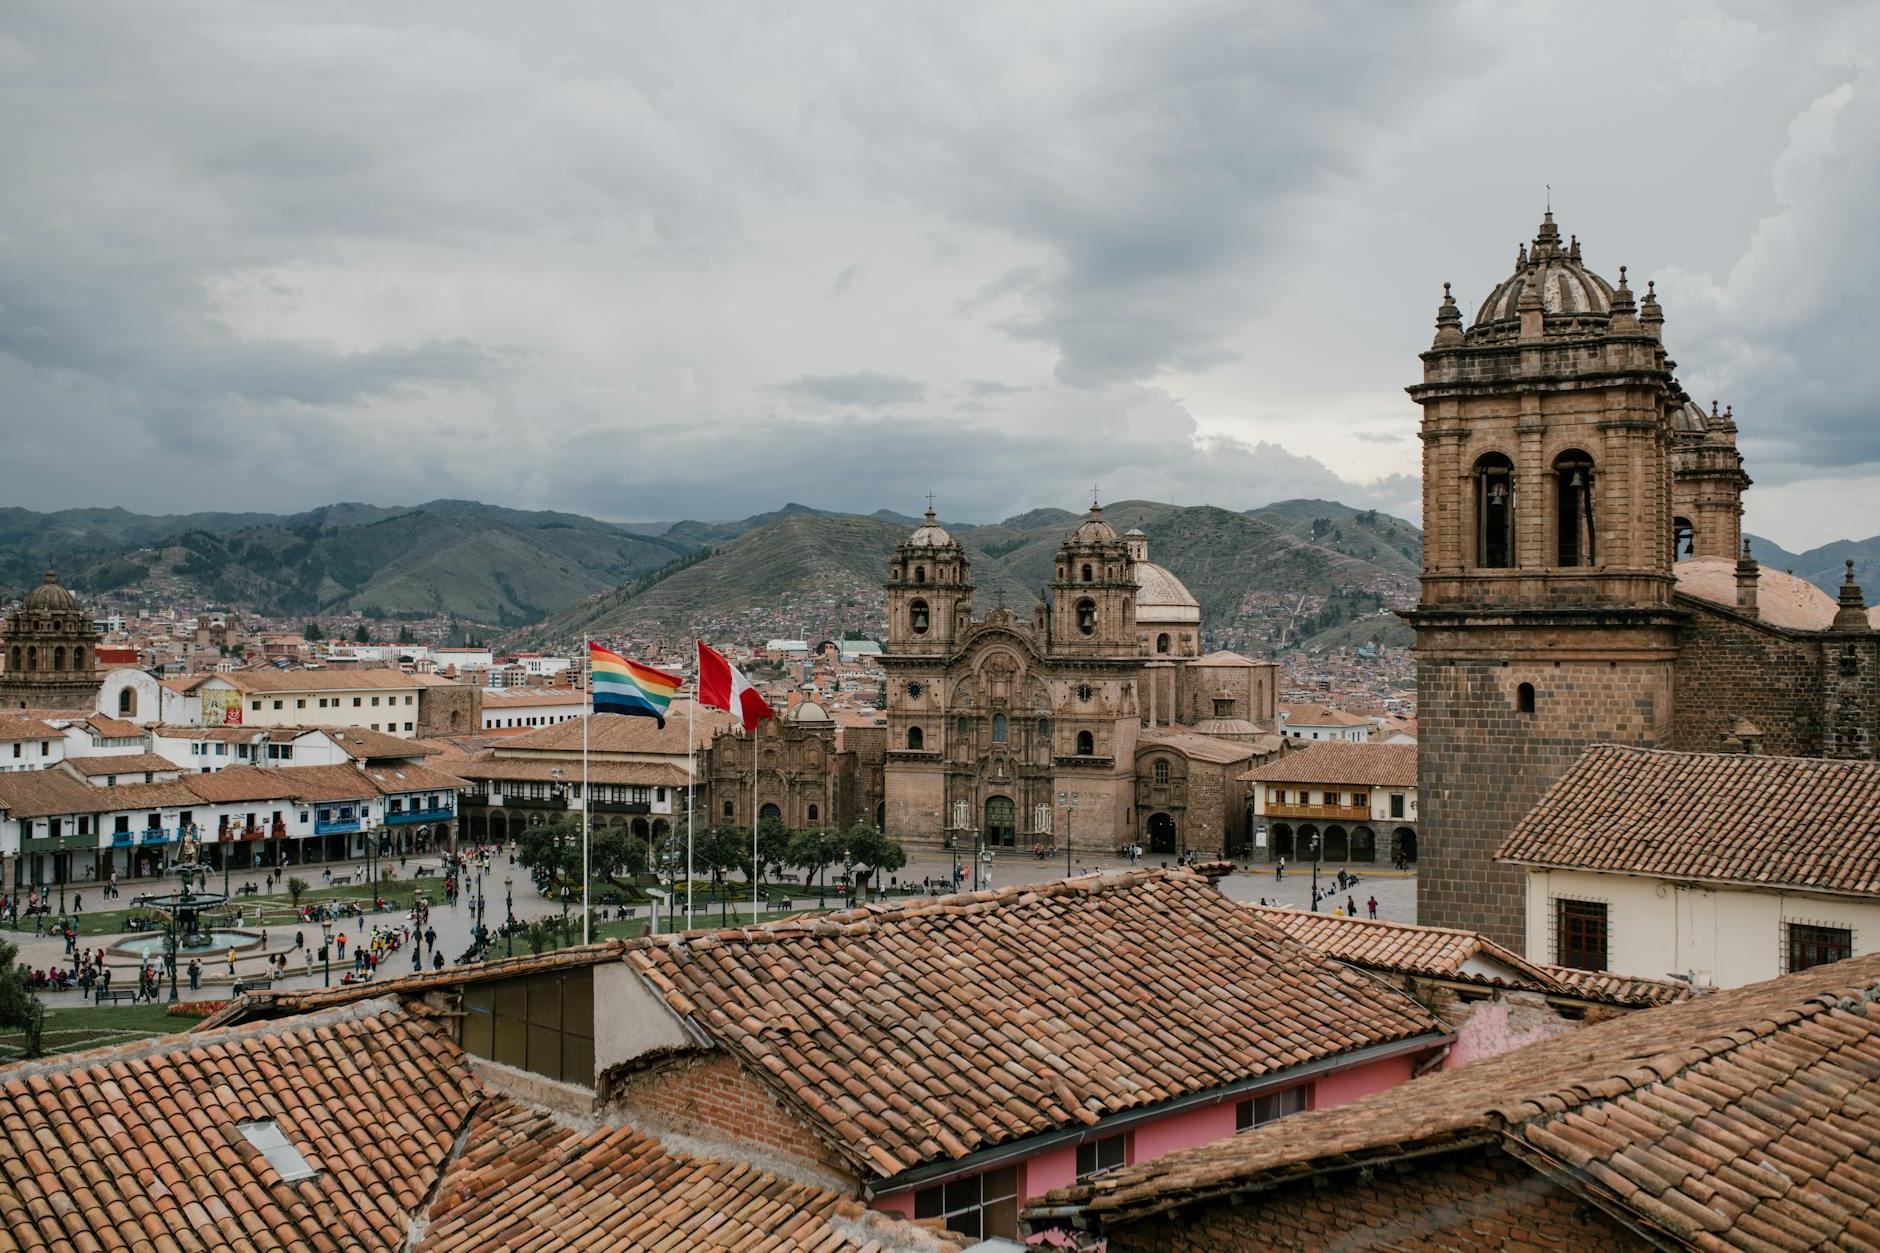 Cityscape of medieval church and houses with old tile roof in Cusco Peru